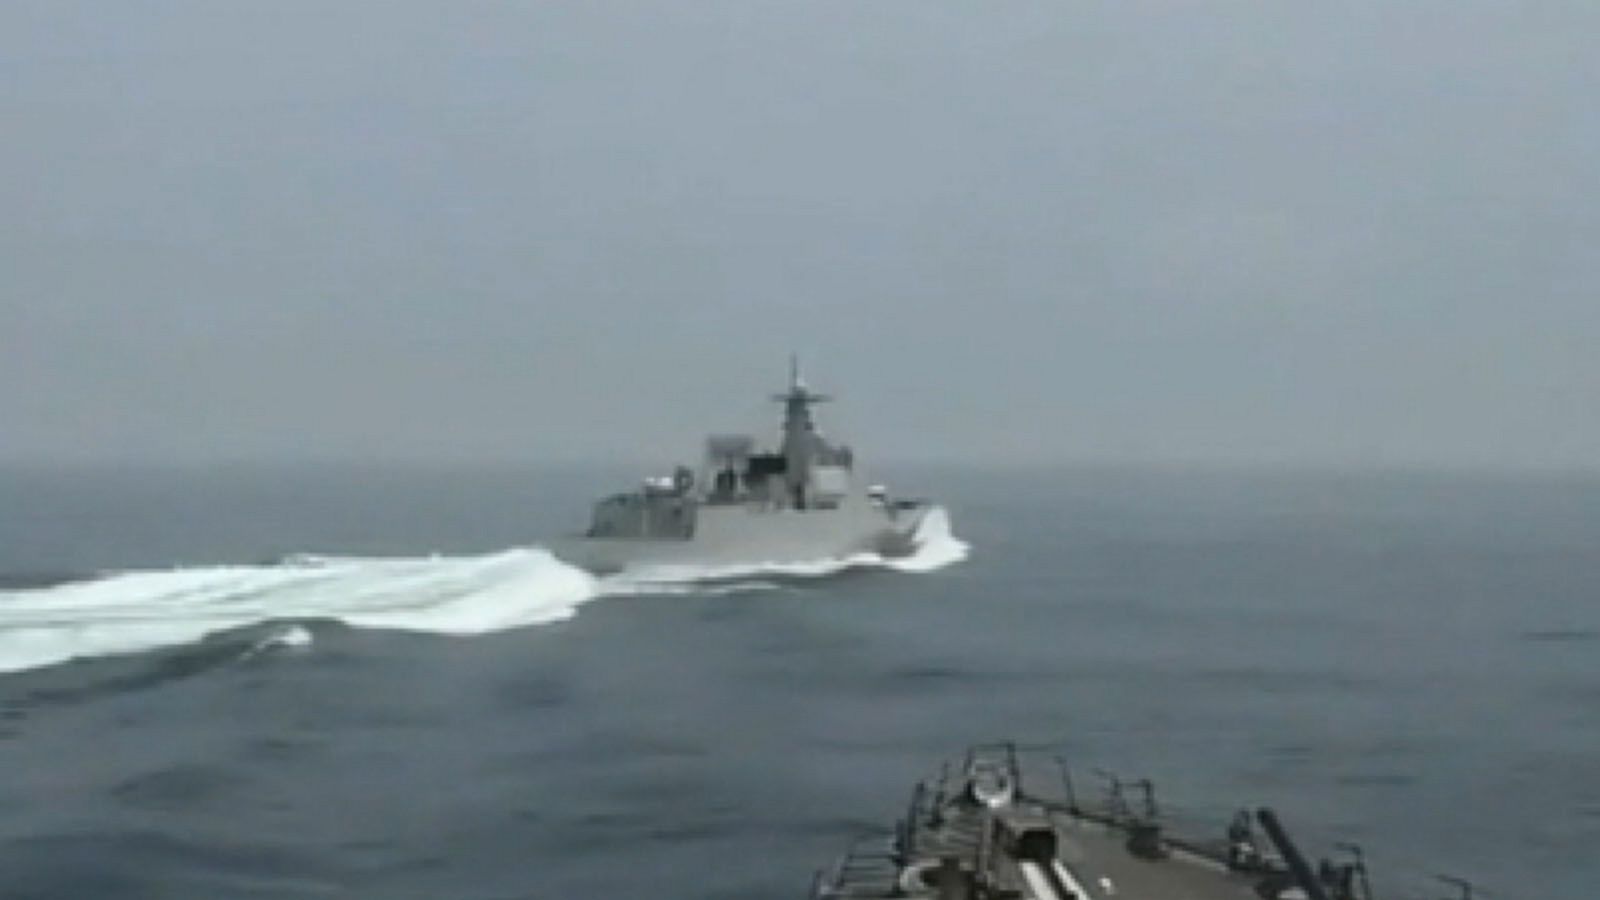 Tense naval encounter with Chinese warship - Good Morning America